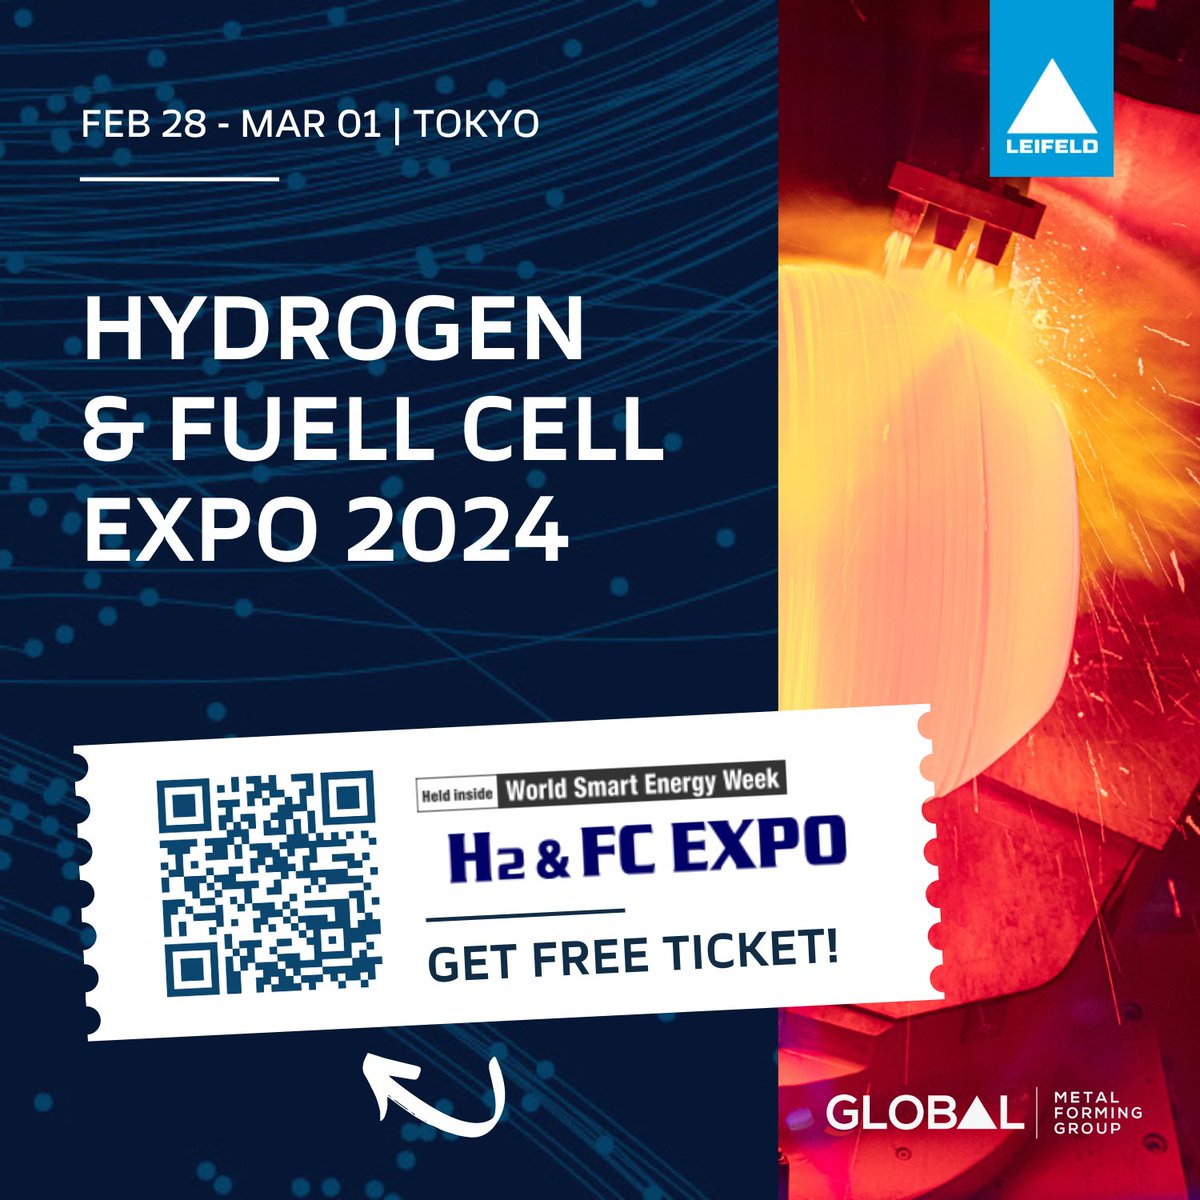 📢 It’s showtime: H2 & FC Expo 2024 Get ready to dive into the forefront of hydrogen and fuel cell technologies at the H2 & FC Expo 2024 in Japan! 🚀Meet us from Feb 28 - Mar 01 at Tokyo Big Sight. Secure your FREE entrance ticket: leifeldms.com/en/events.html